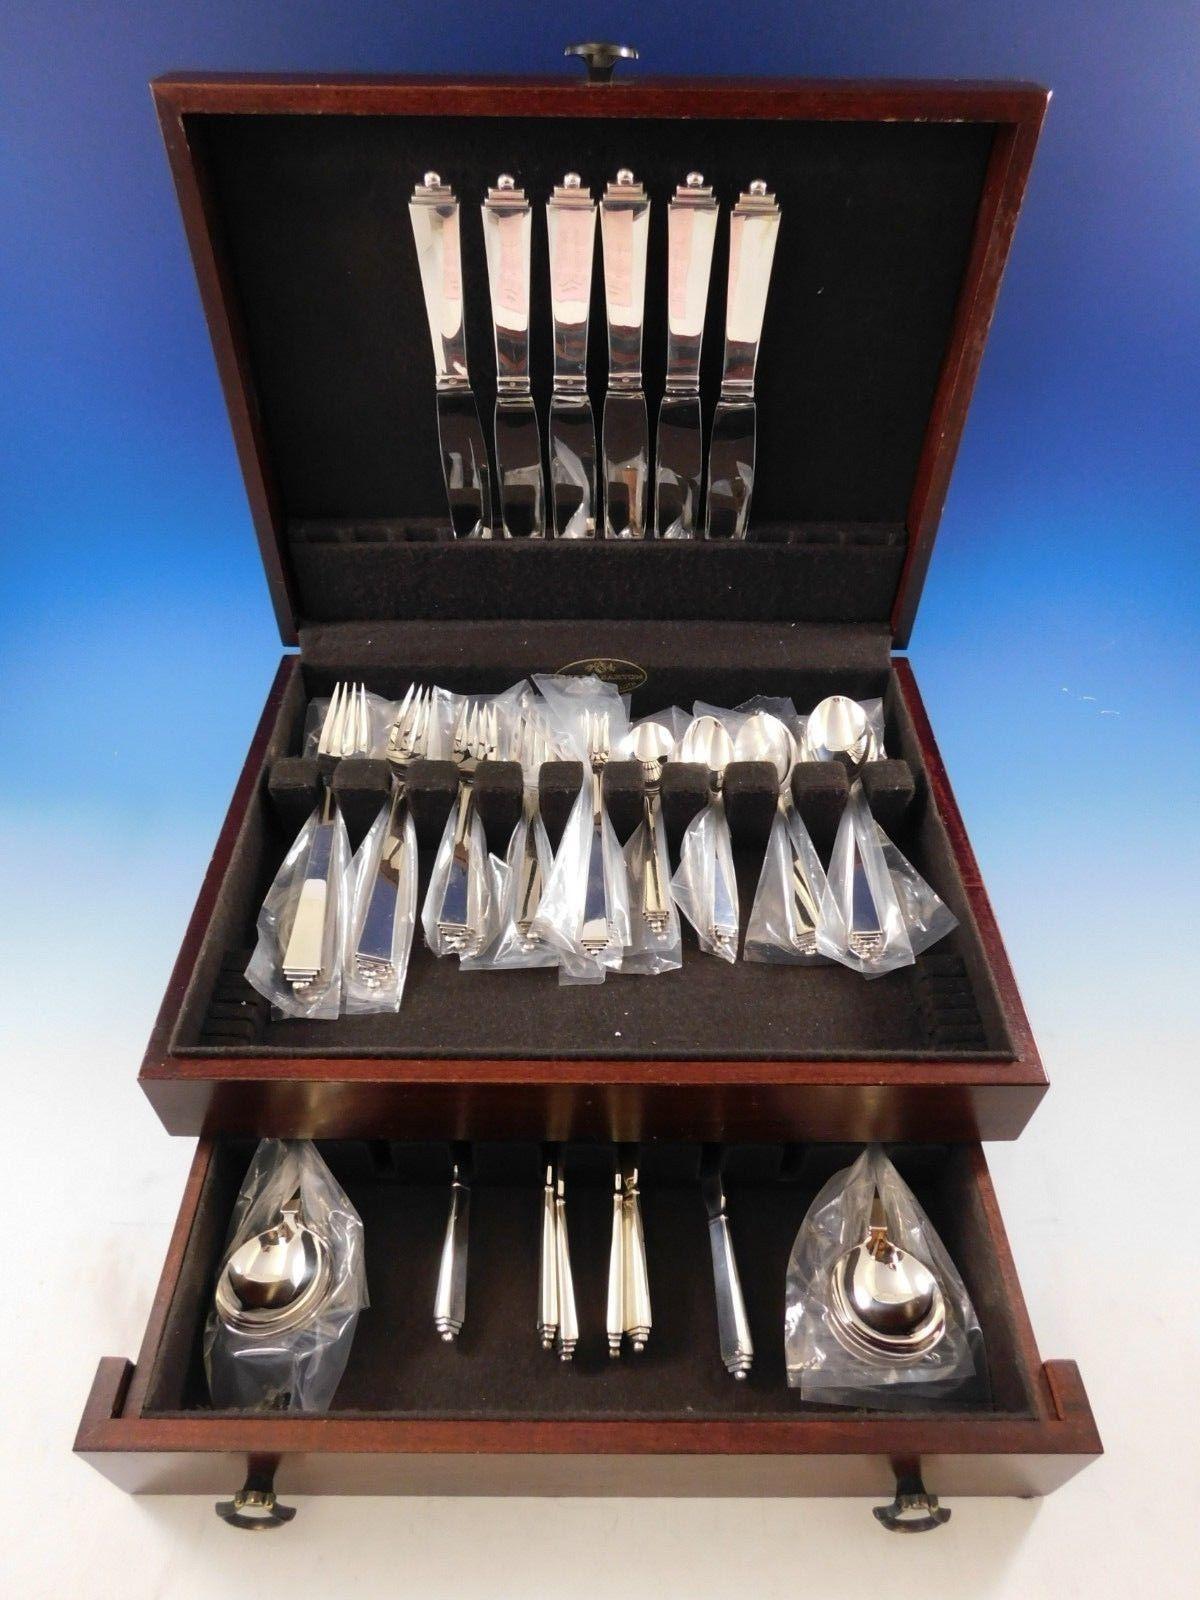 Stunning Pyramid by Georg Jensen Danish sterling silver flatware set - 48 pieces. This set includes:

6 dinner knives, 9 5/8